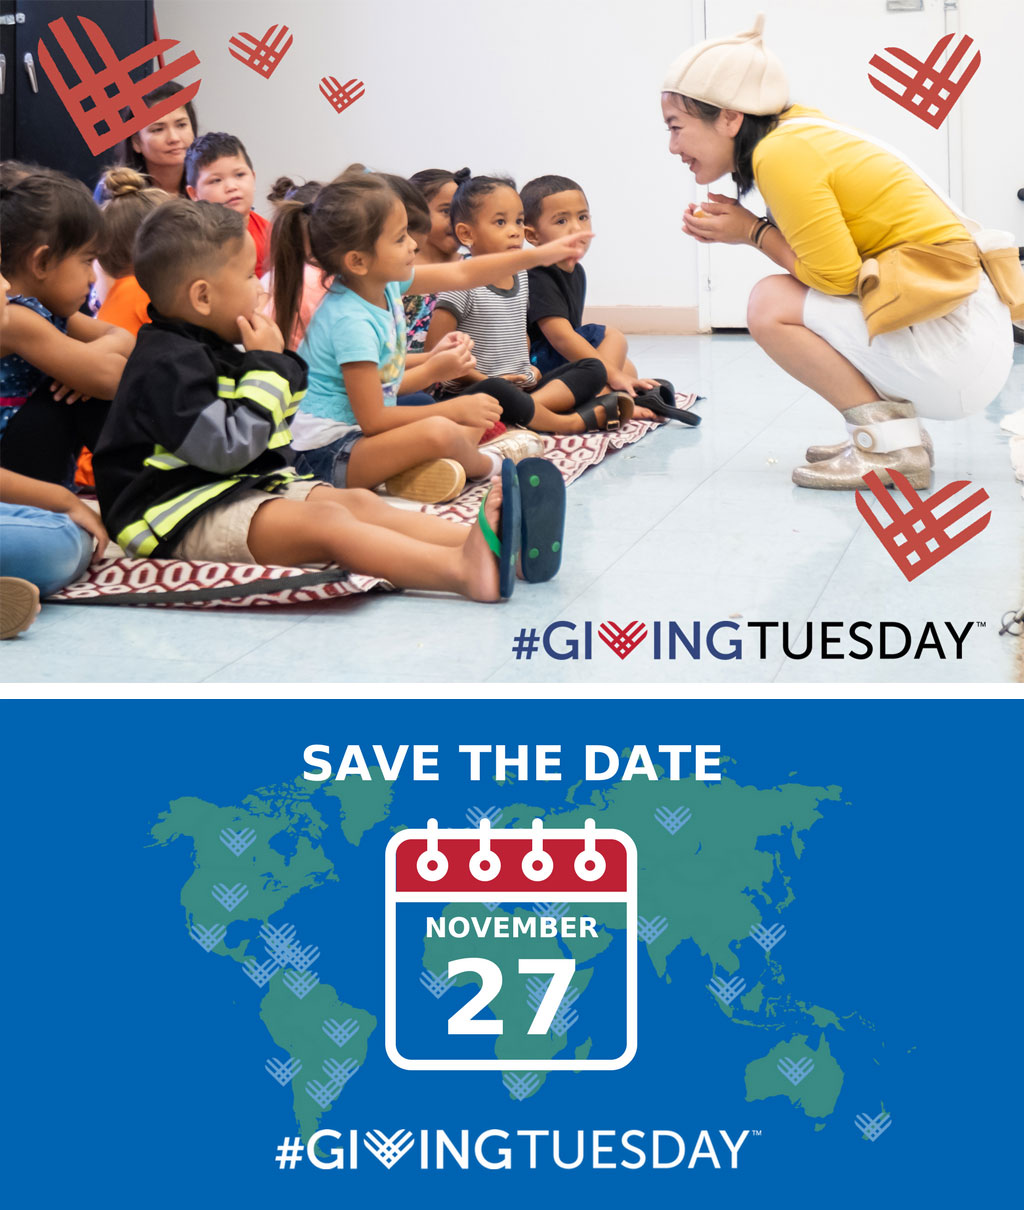 Save-the-date–giving-tuesday-2018